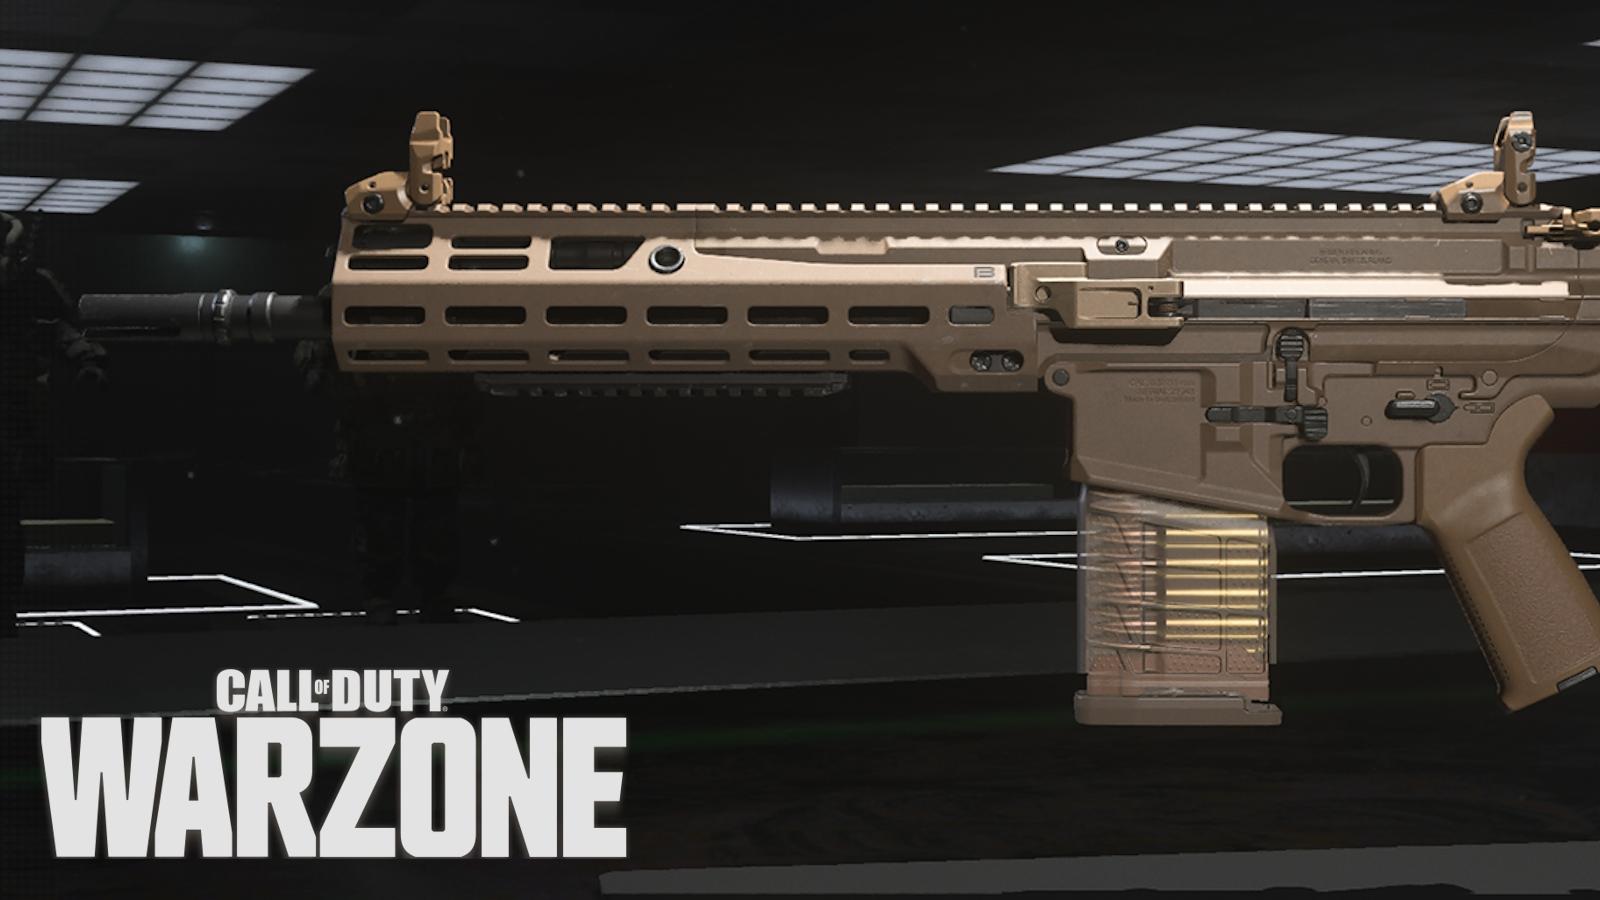 Bas-B battle rifle with Call of Duty: Warzone logo.